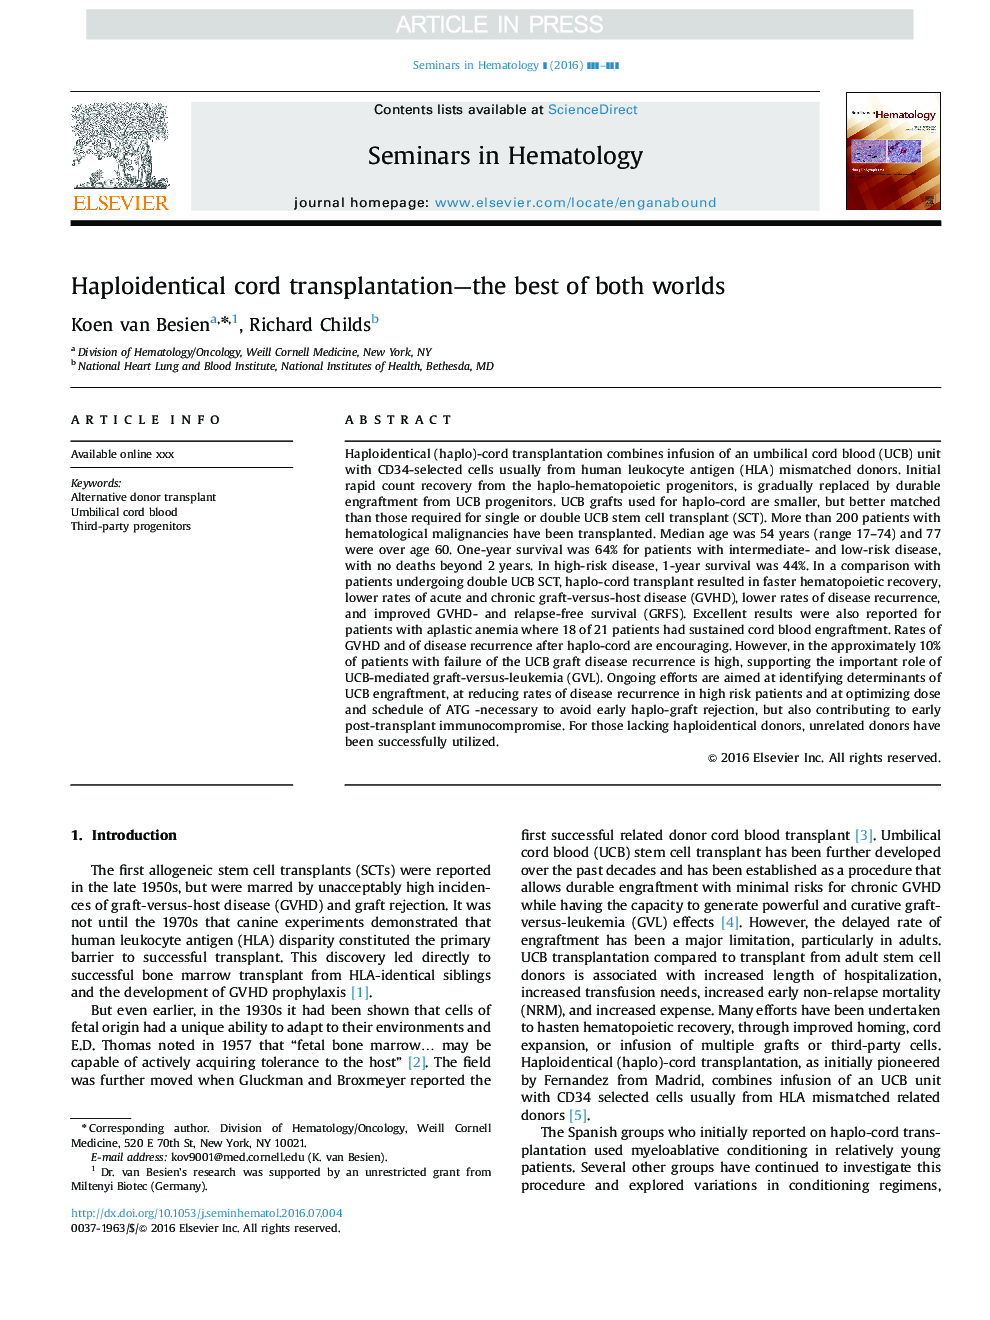 Haploidentical cord transplantation-The best of both worlds